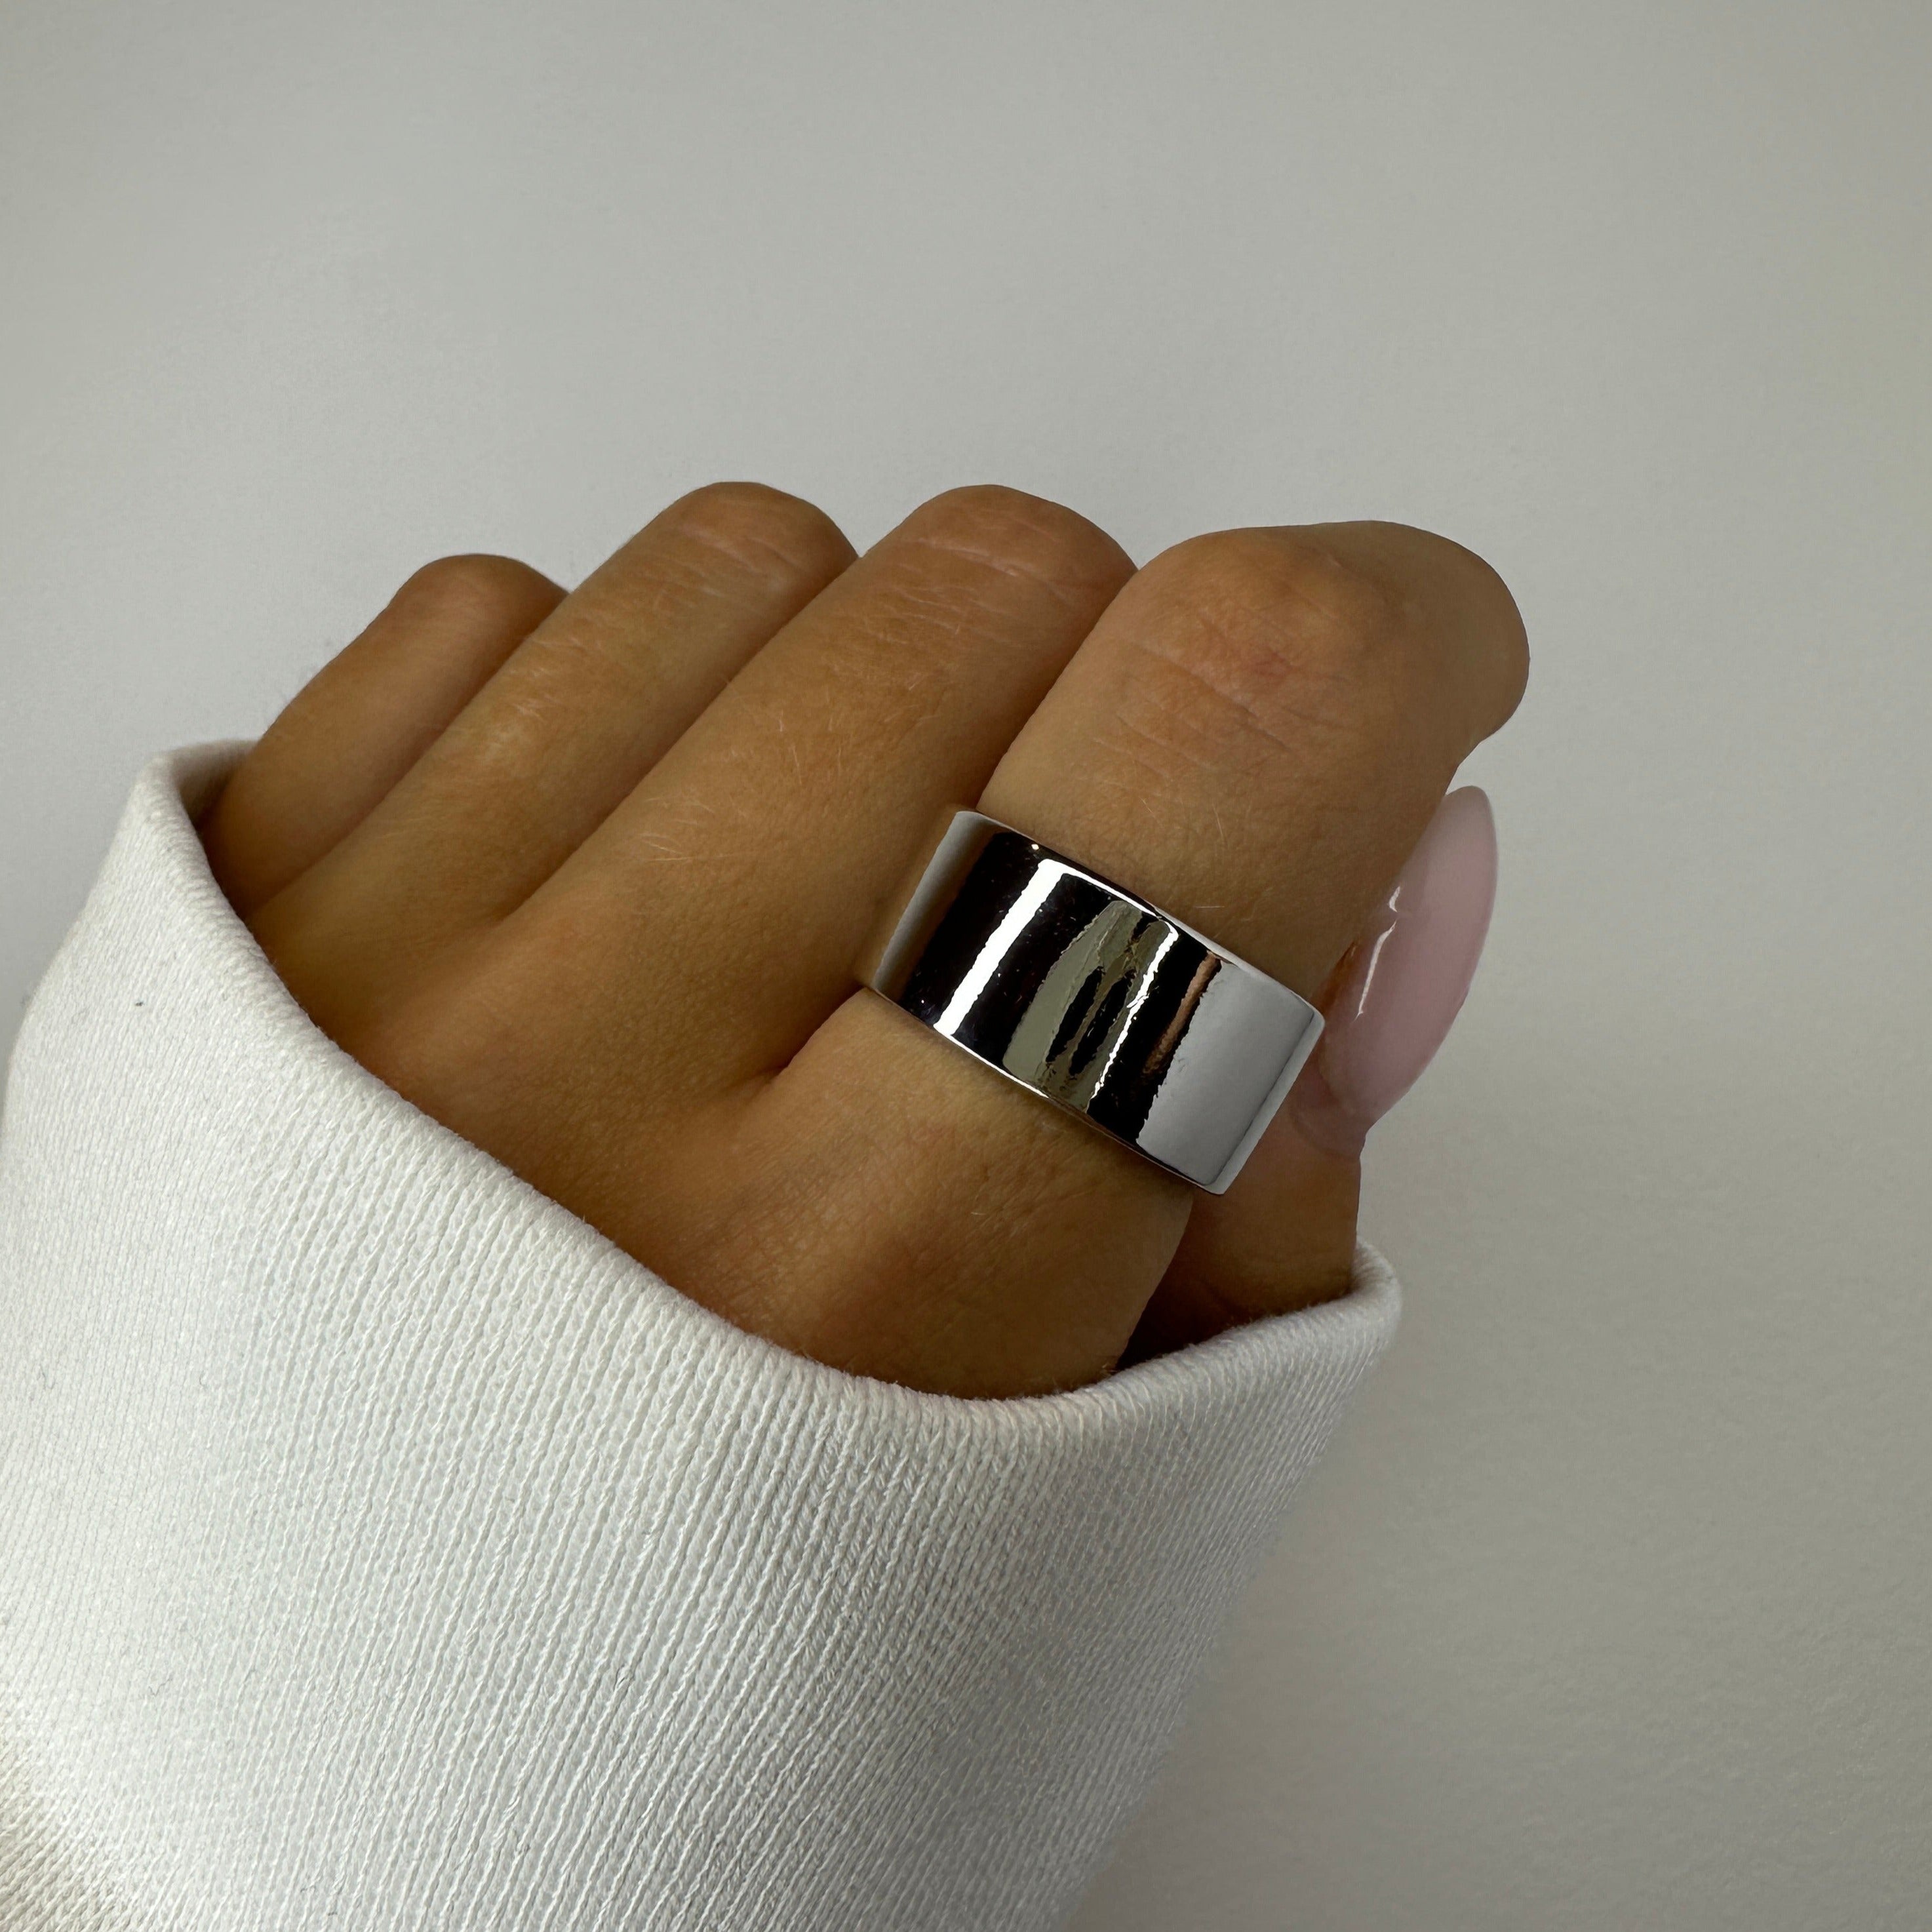 Buy Chunky Silver Ring, Thick Silver Ring, Adjustable Stackable Ring, Silver  Stacking Ring, Silver Statement Ring, Unisex Ring, Ring, Gift Online in  India - Etsy